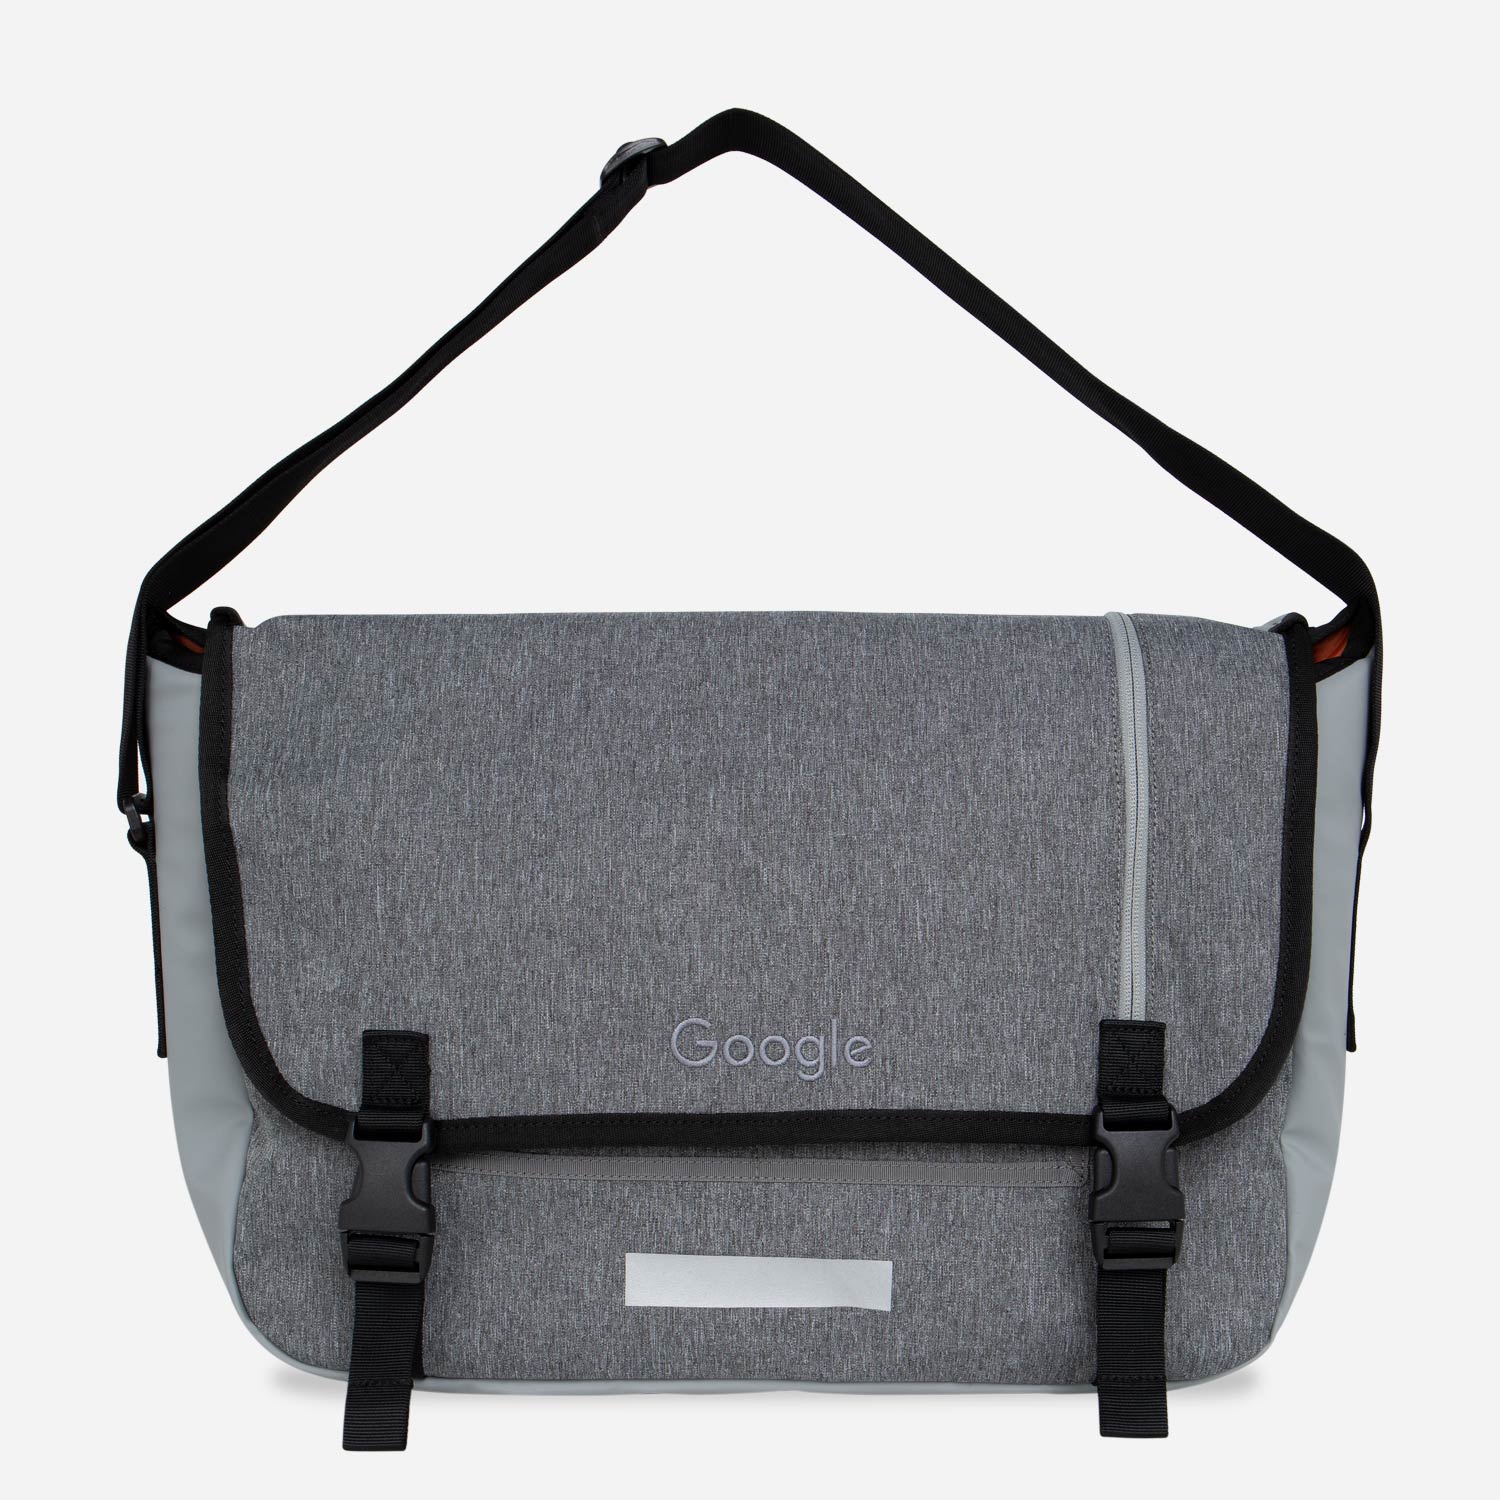 where can i find a messenger bag